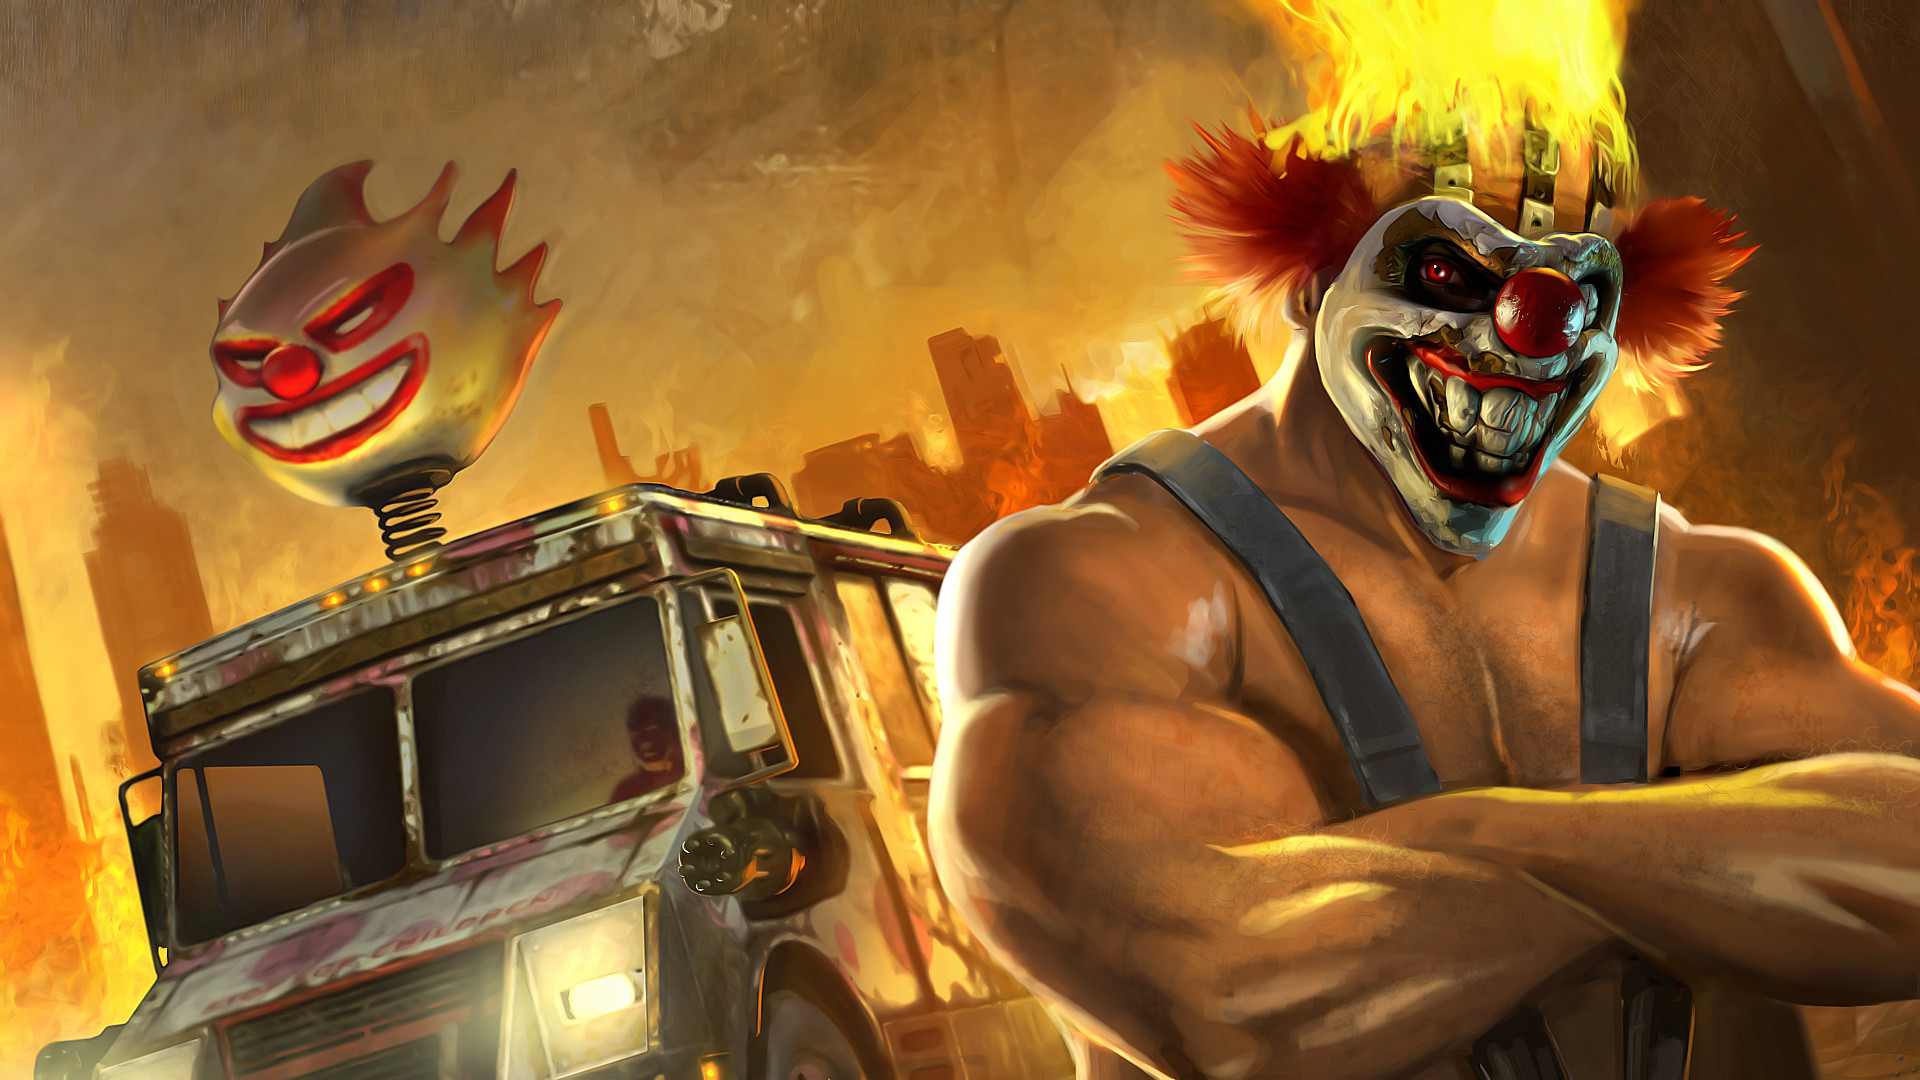 1920x1080 Image - 13093301881080ptwisted-metal-wallpapers-hd-2.jpg | Twisted Metal  Wiki | FANDOM powered by Wikia